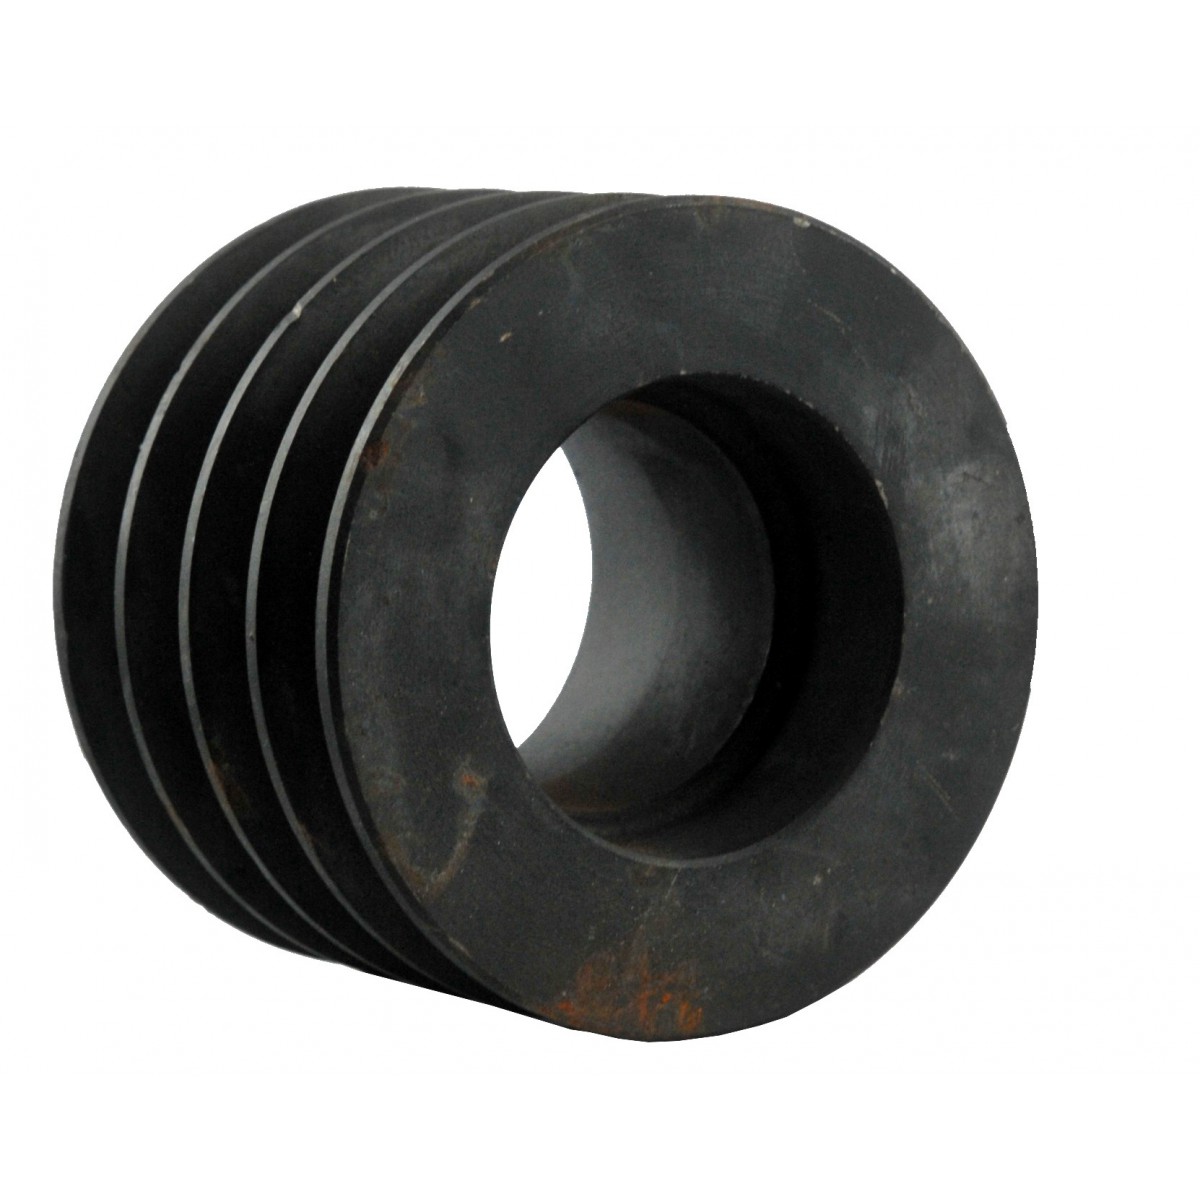 Small pulley - used in larger AG mowers